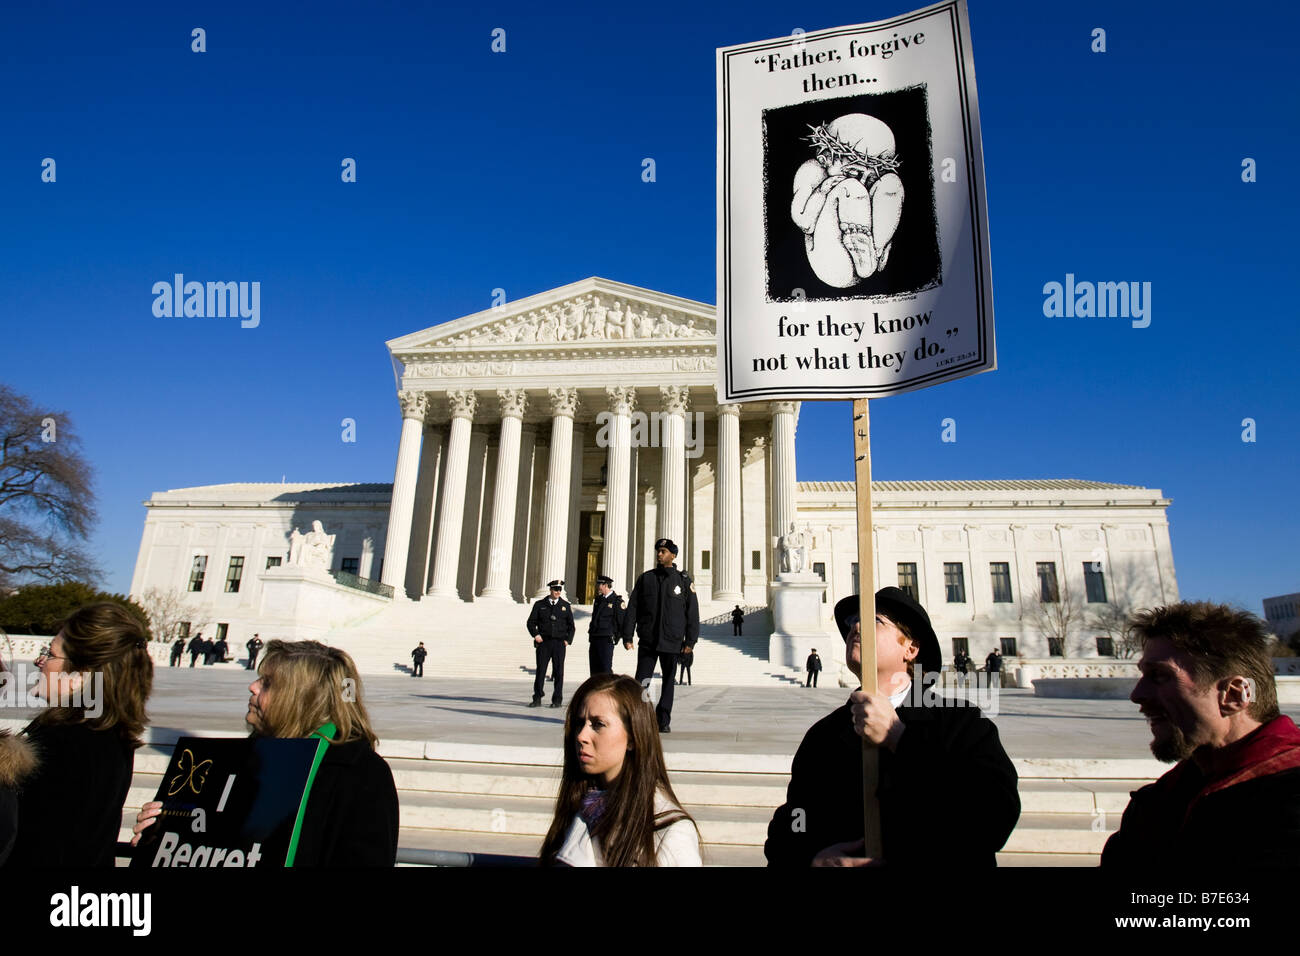 Pro-Life supporter holds a sign in front of the US Supreme Court - March for Life Rally, 2009 - Washington, DC USA Stock Photo